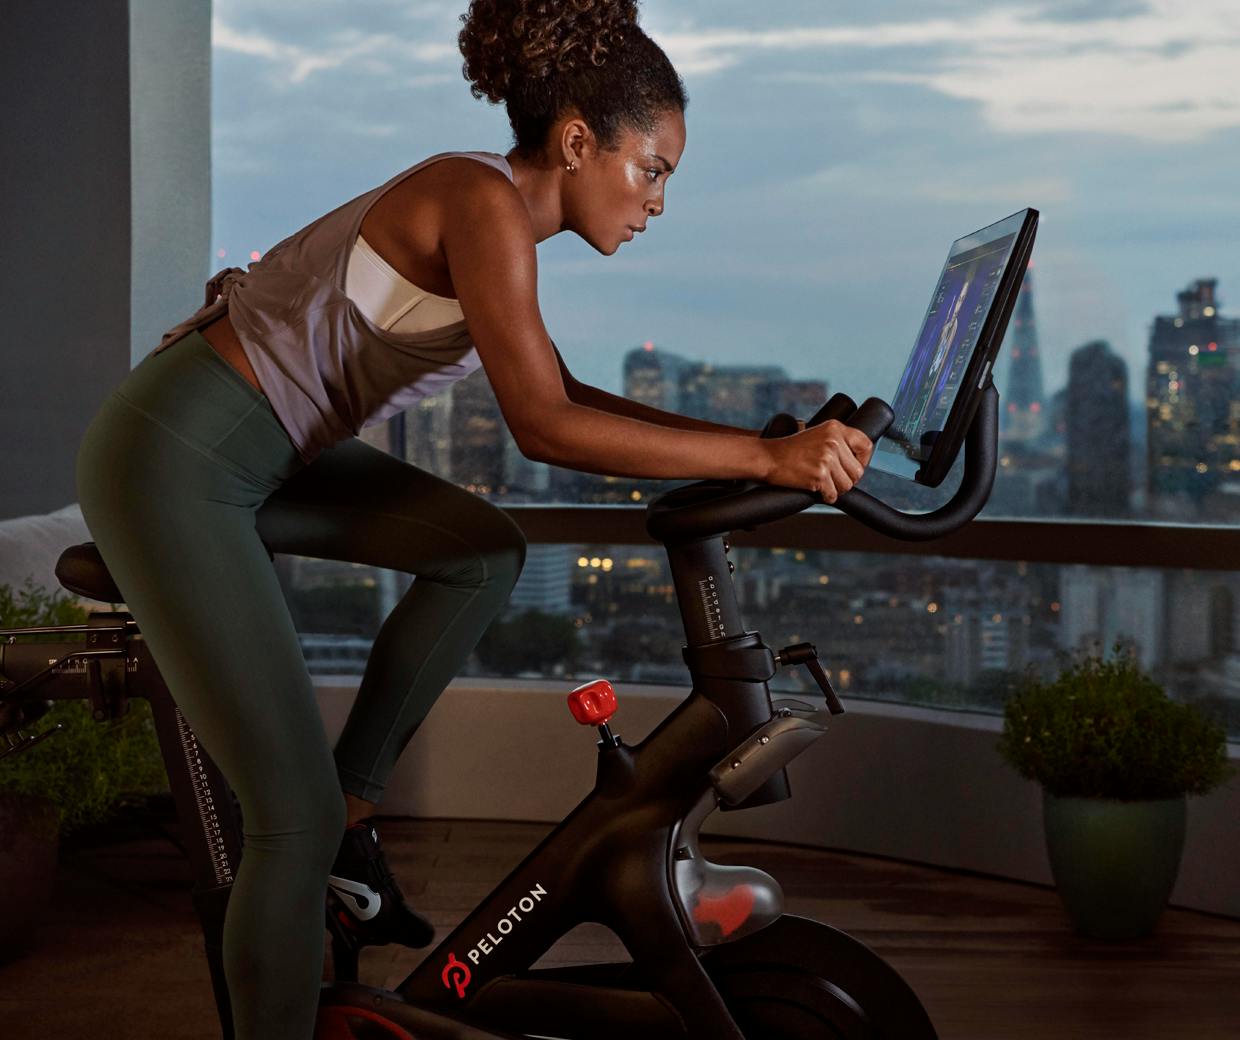 Peloton launches £7m ad blitz to bring virtual spin classes to the